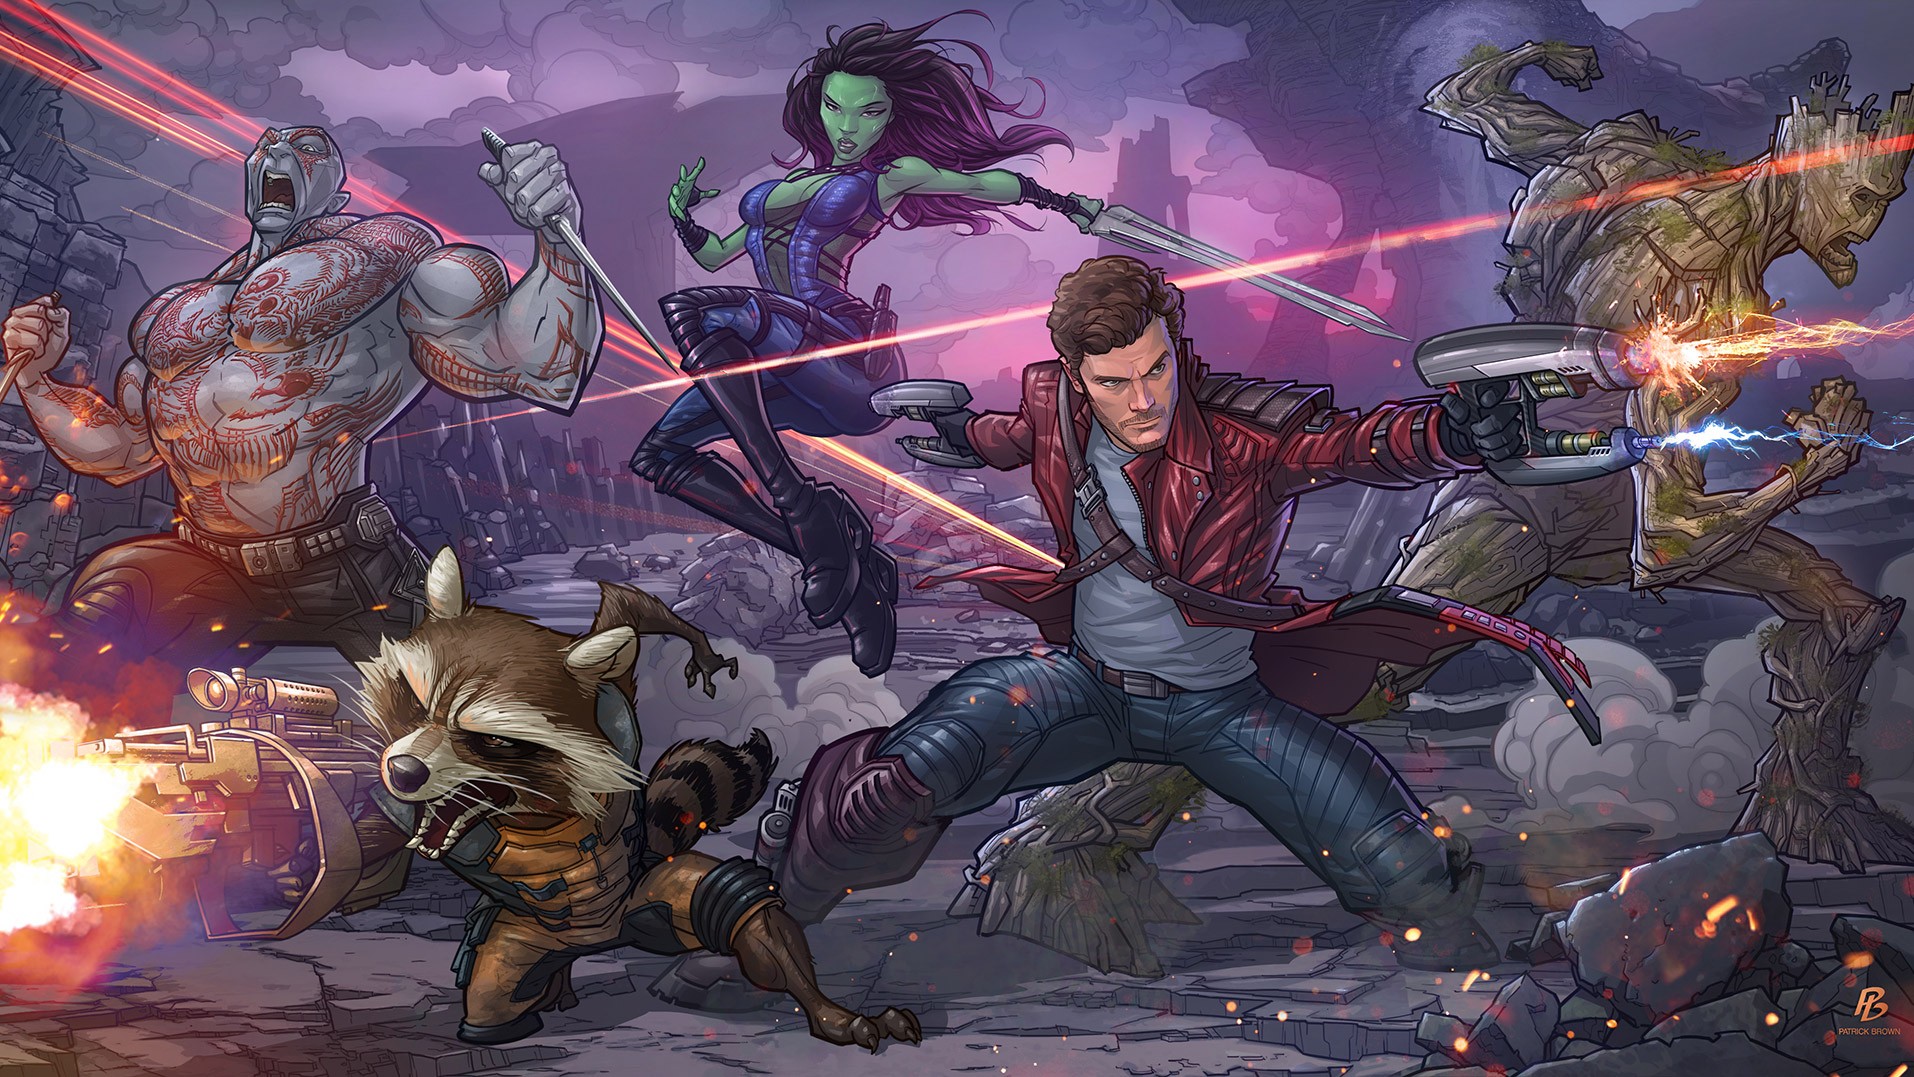 General 1914x1077 Guardians of the Galaxy digital art Marvel Cinematic Universe movies artwork science fiction Rocket Raccoon Star-Lord